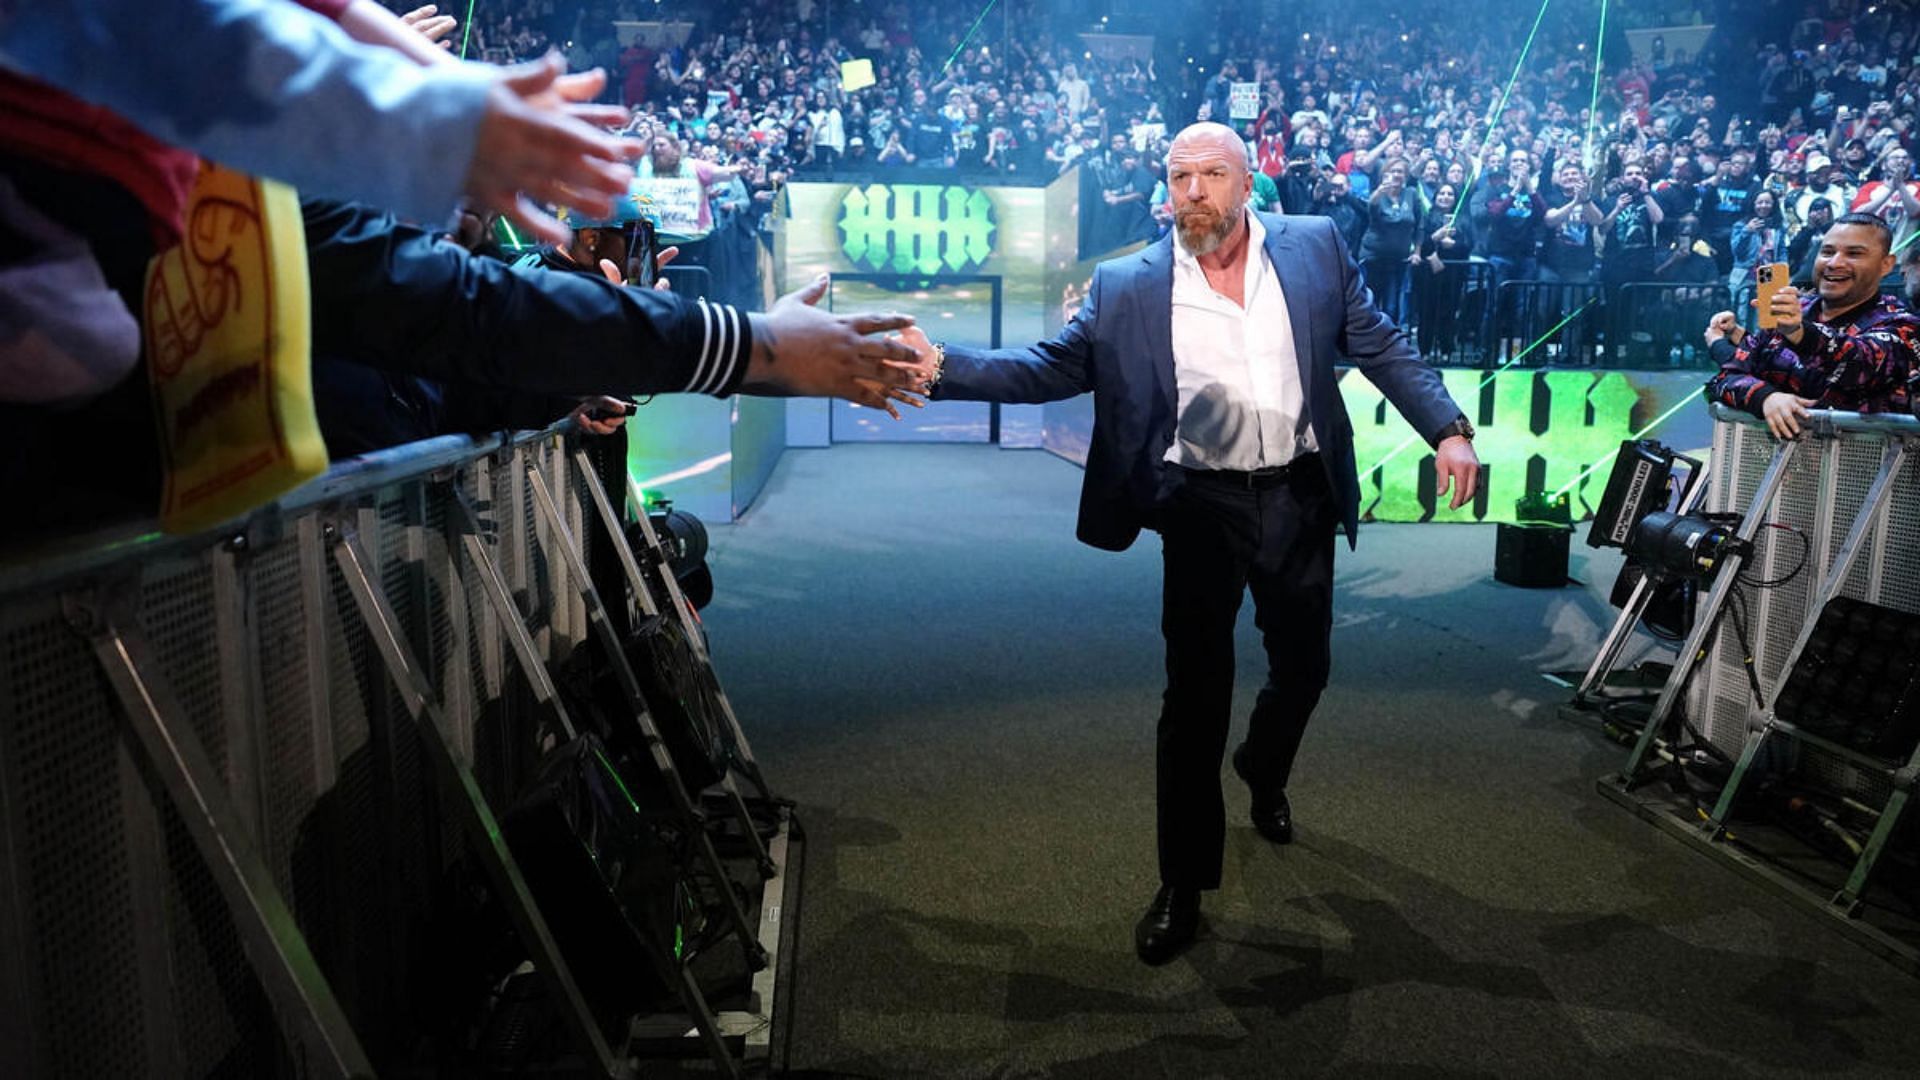 Triple H has made some tough calls in the new era